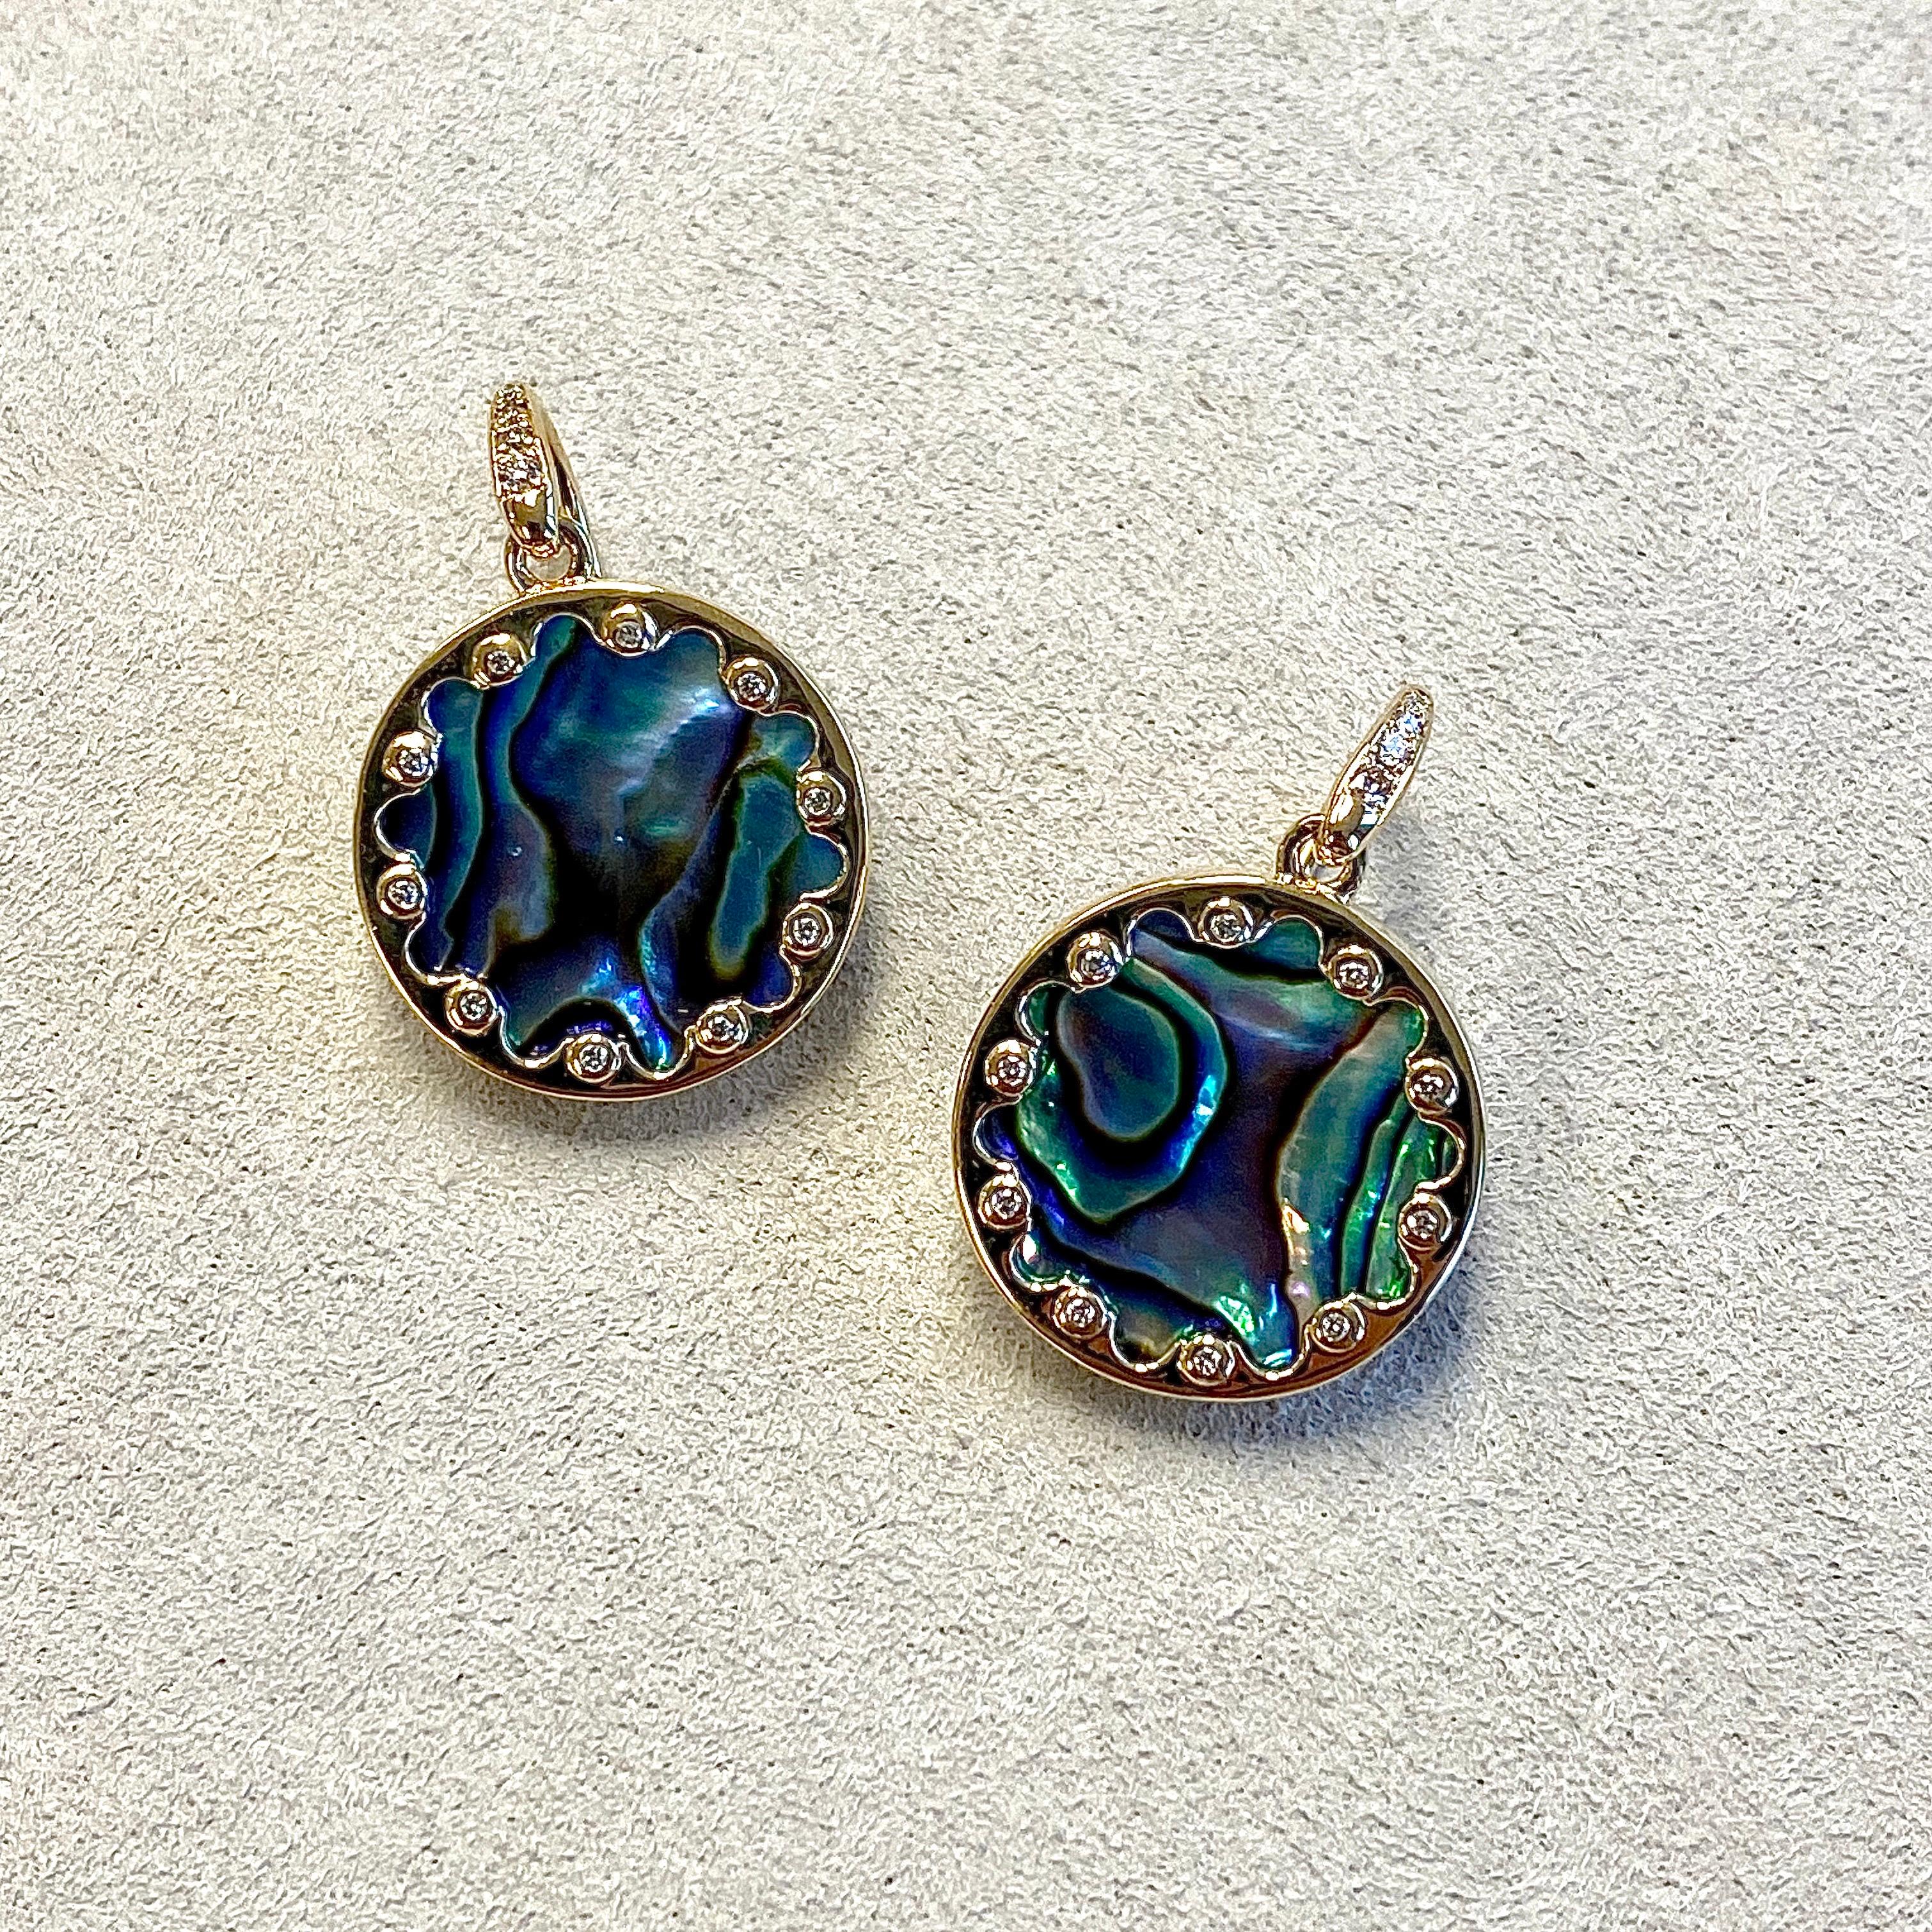 Created in 18 karat yellow gold
Abalone shell 6.3 cts approx
Diamonds 0.13 ct approx
Limited edition

Adorn yourself with the luxe beauty of these exquisite Candy Blue Topaz & Diamond Earrings. Set in 18 karat yellow gold and featuring a tasteful